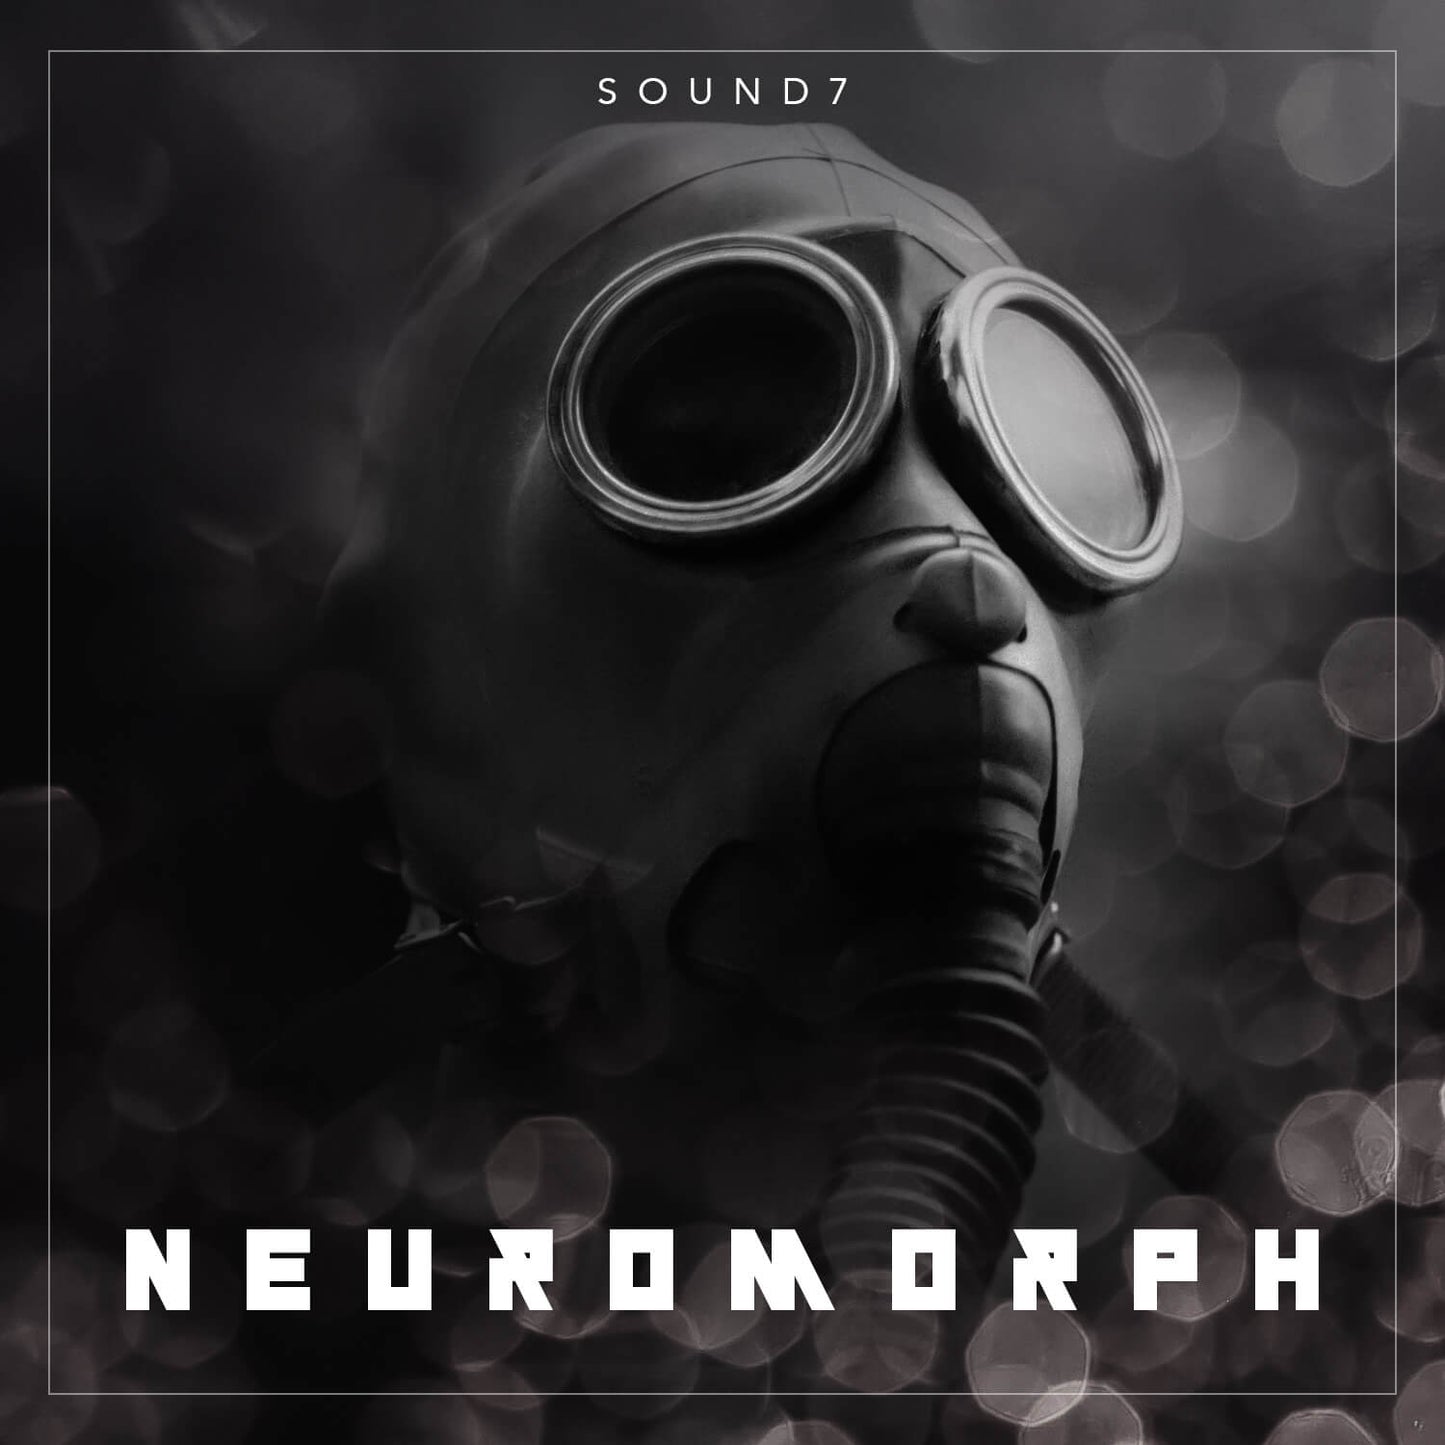 64 serum drum and bass presets A preset pack created specifically with influences taken from Sub Focus and Nero all the way to the Underground Drum and Bass scenes with dank atmosphere sounds to jaw ripping basses